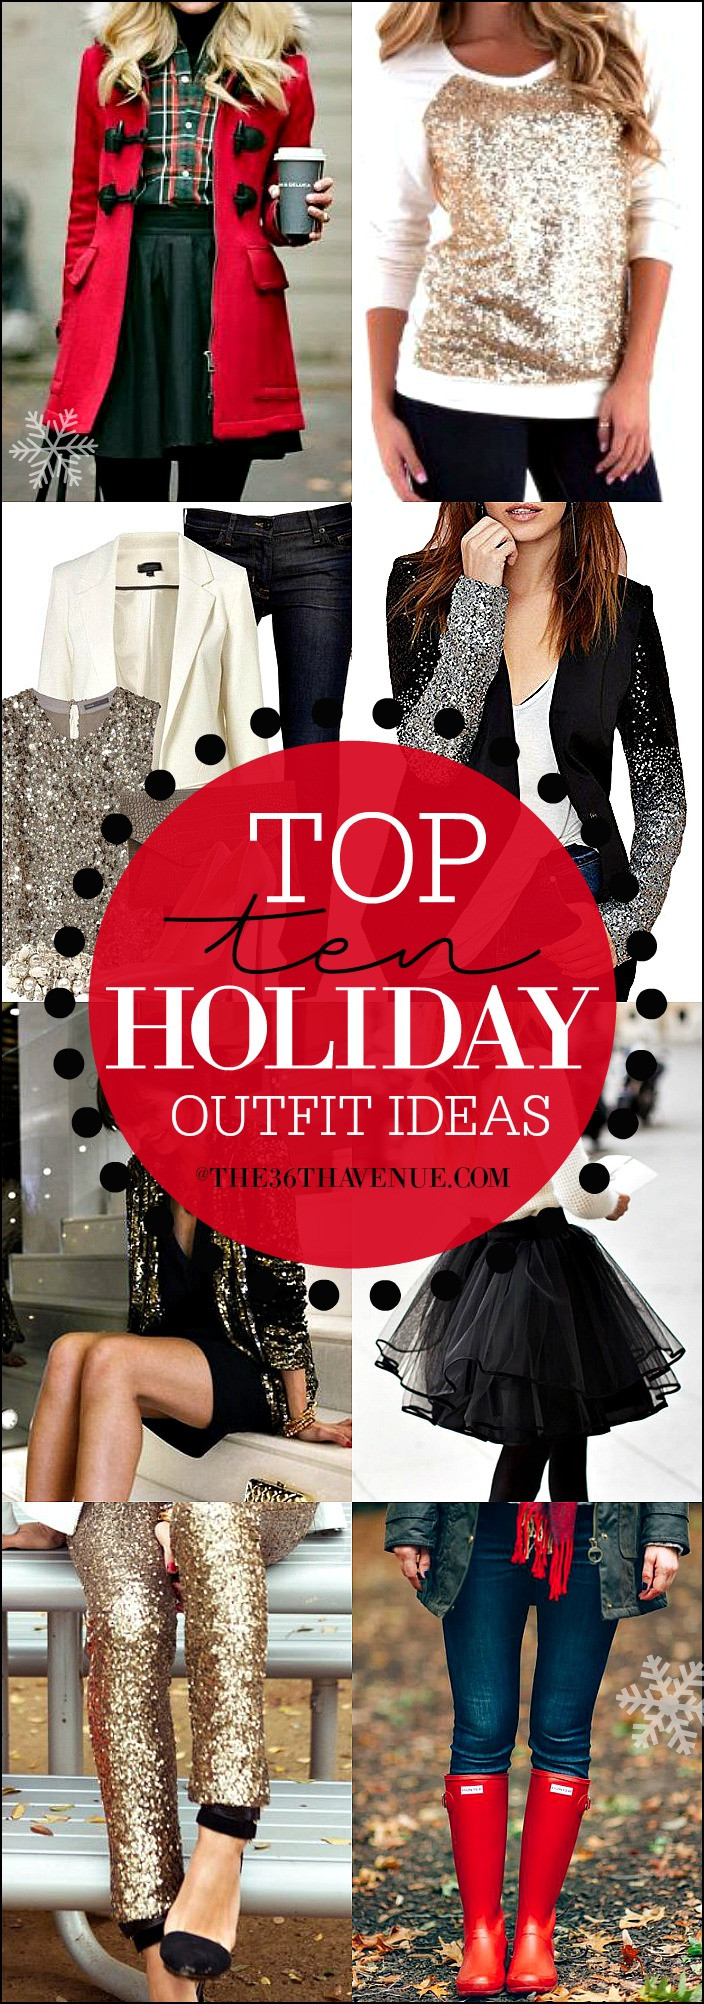 Holiday Party Outfit Ideas
 Holiday Outfit Ideas Women s Fashion The 36th AVENUE